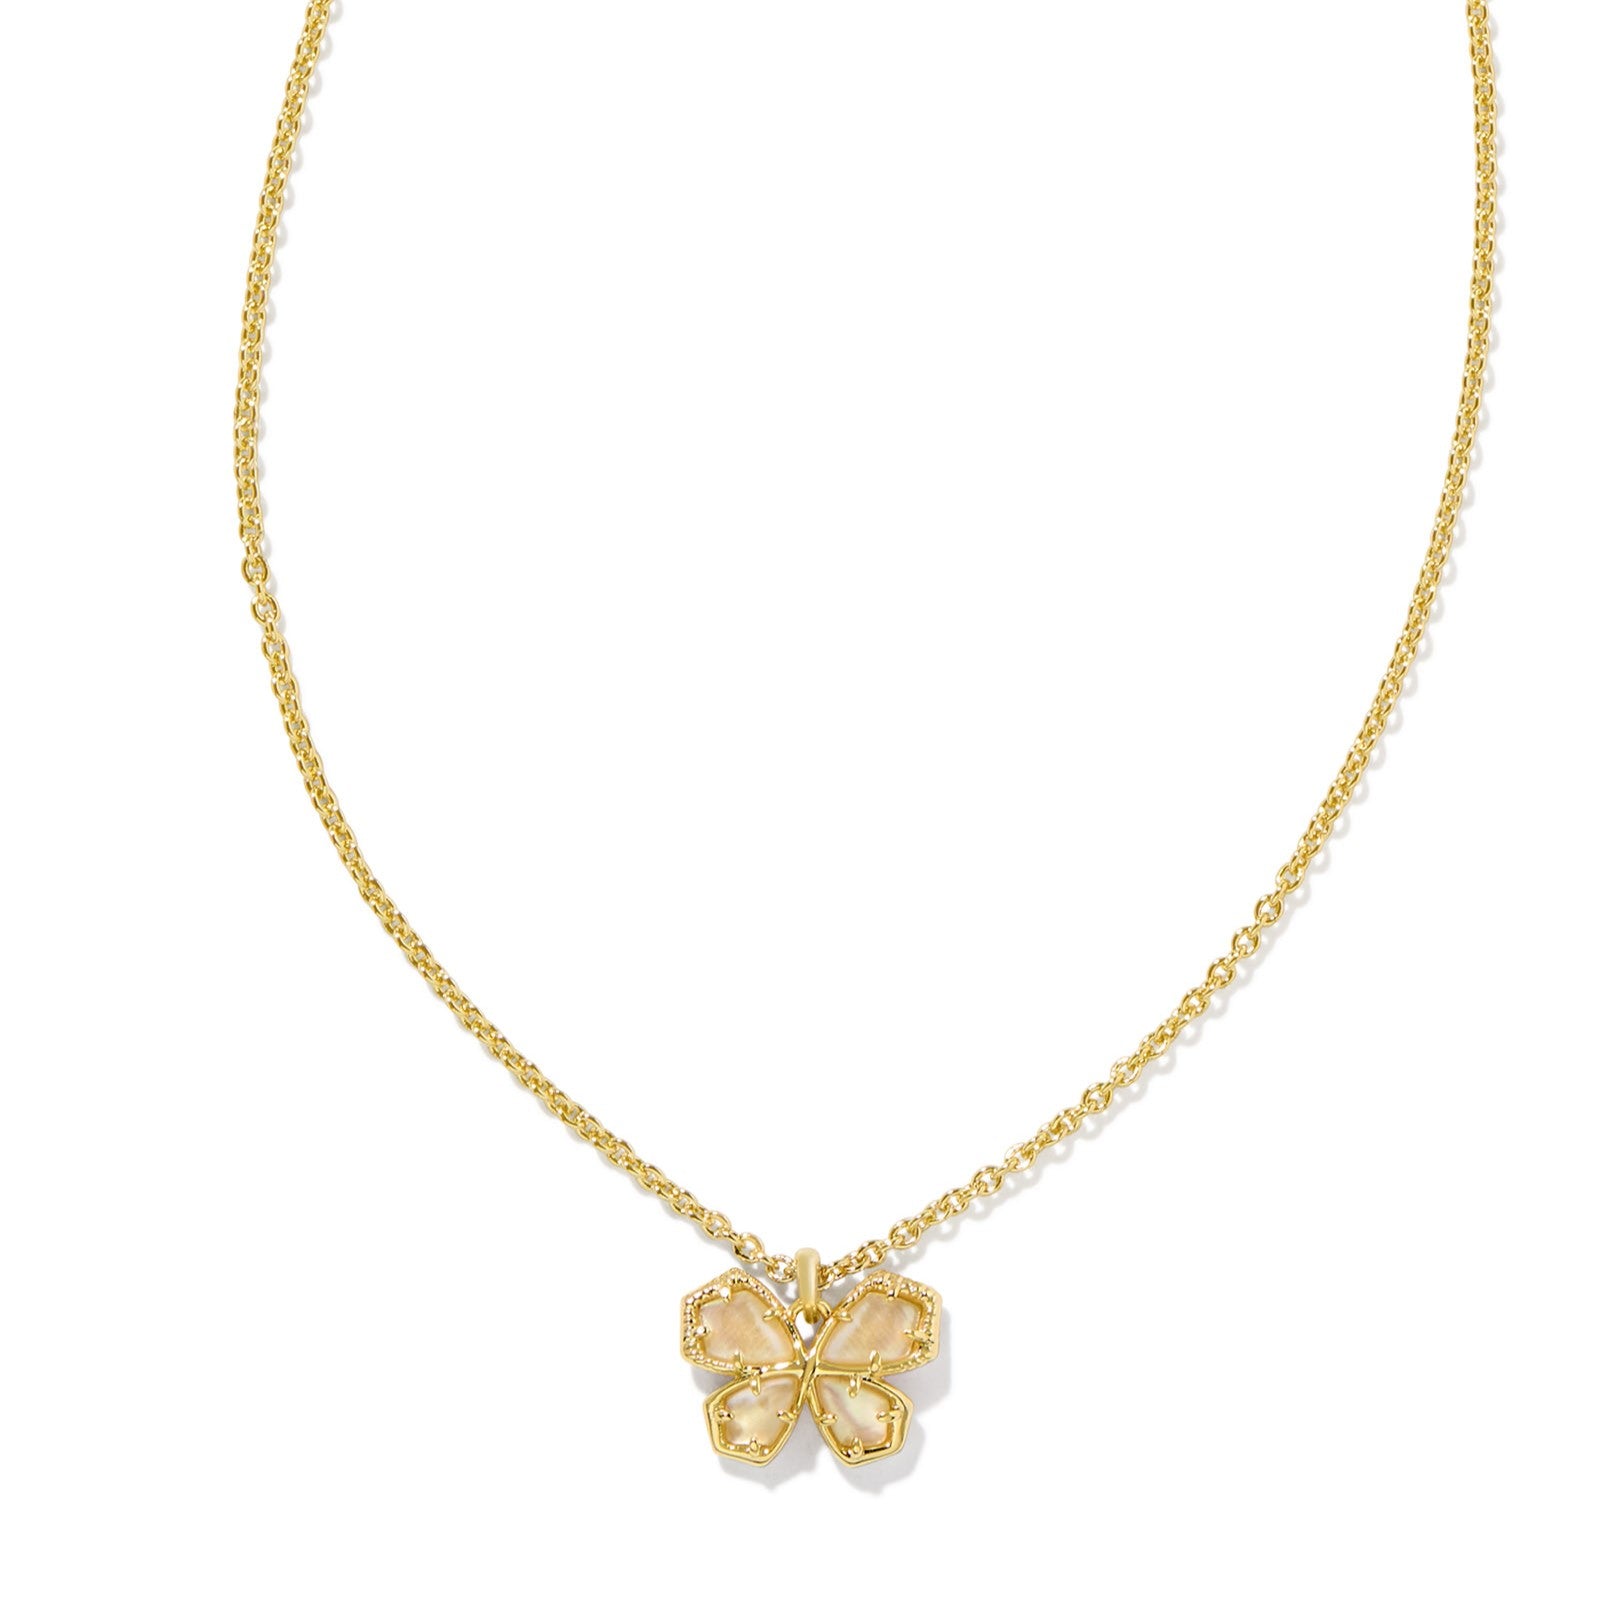 Kendra Scott | Mae Gold Butterfly Short Pendant Necklace in Golden Abalone - Giddy Up Glamour Boutique